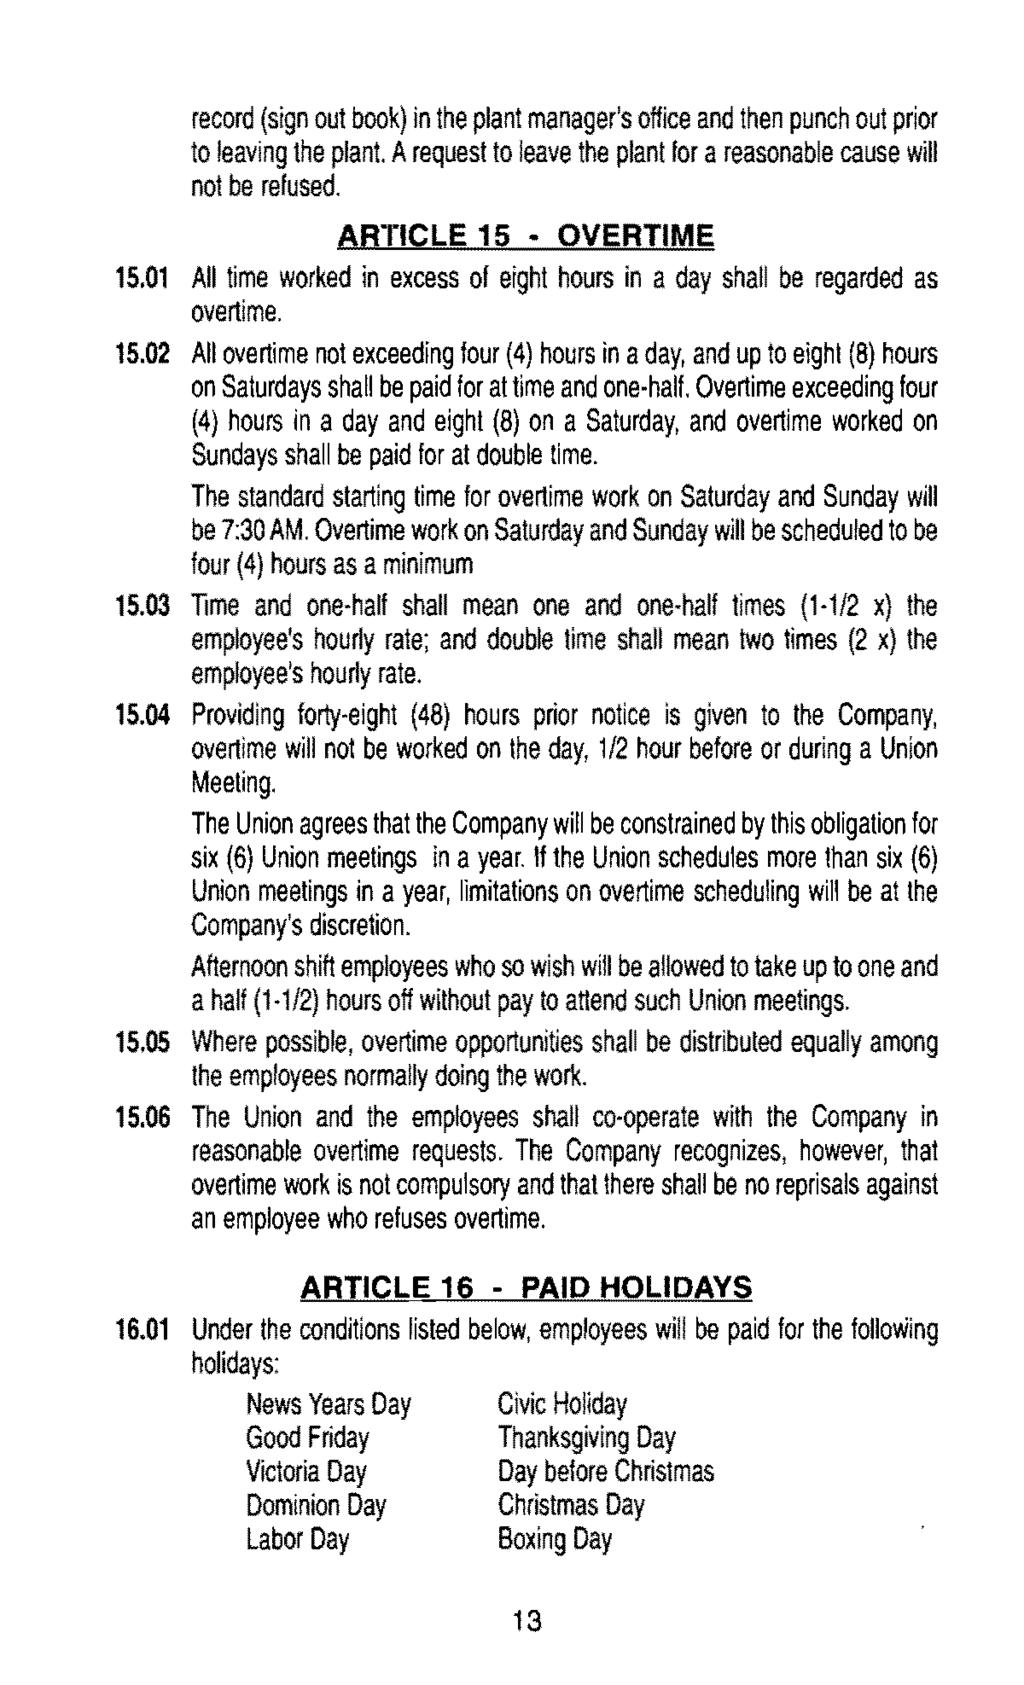 record (sign out book) in the plant manager's office and then punch out prior to leaving the plant. A request to leave the plant for a reasonable cause will not be refused. ARTICLE 15 OVERTIME 15.